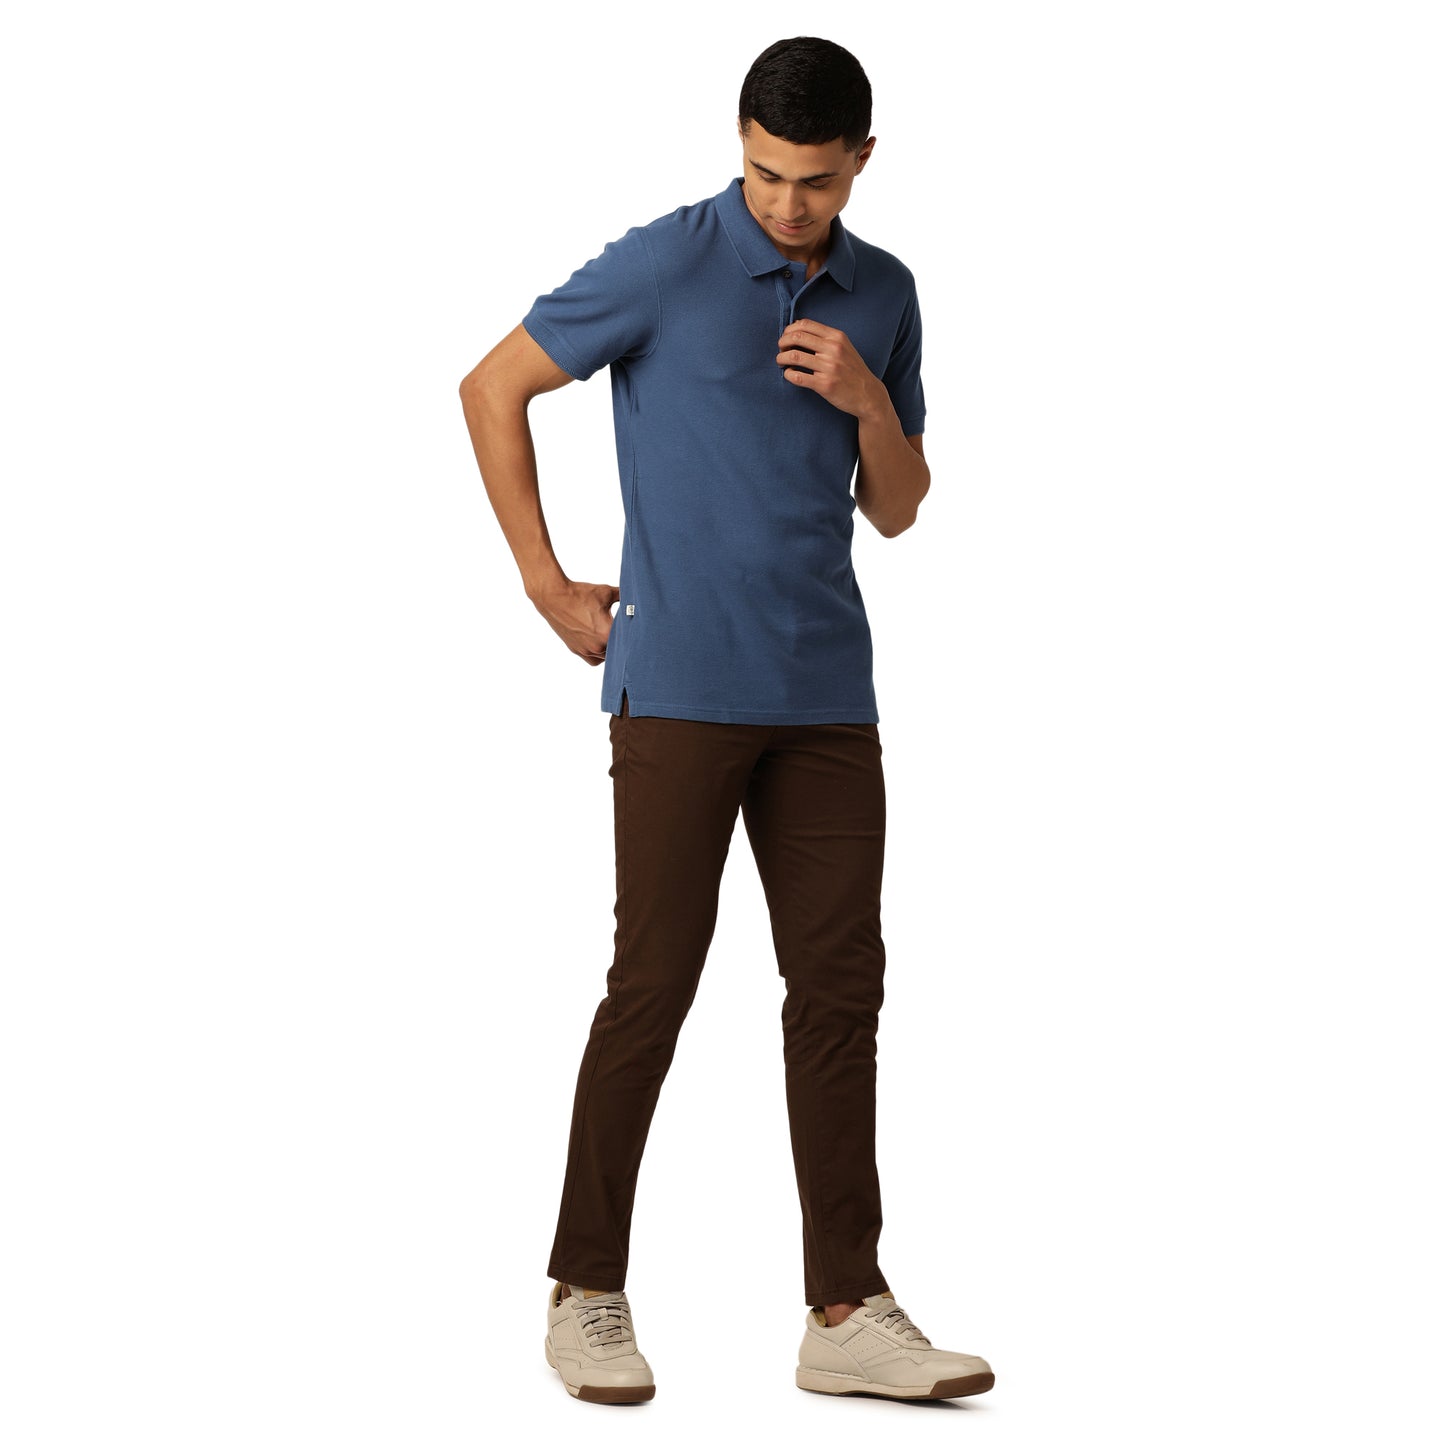 Canyon Combo Polo Neck T-Shirts (Pack of 3)